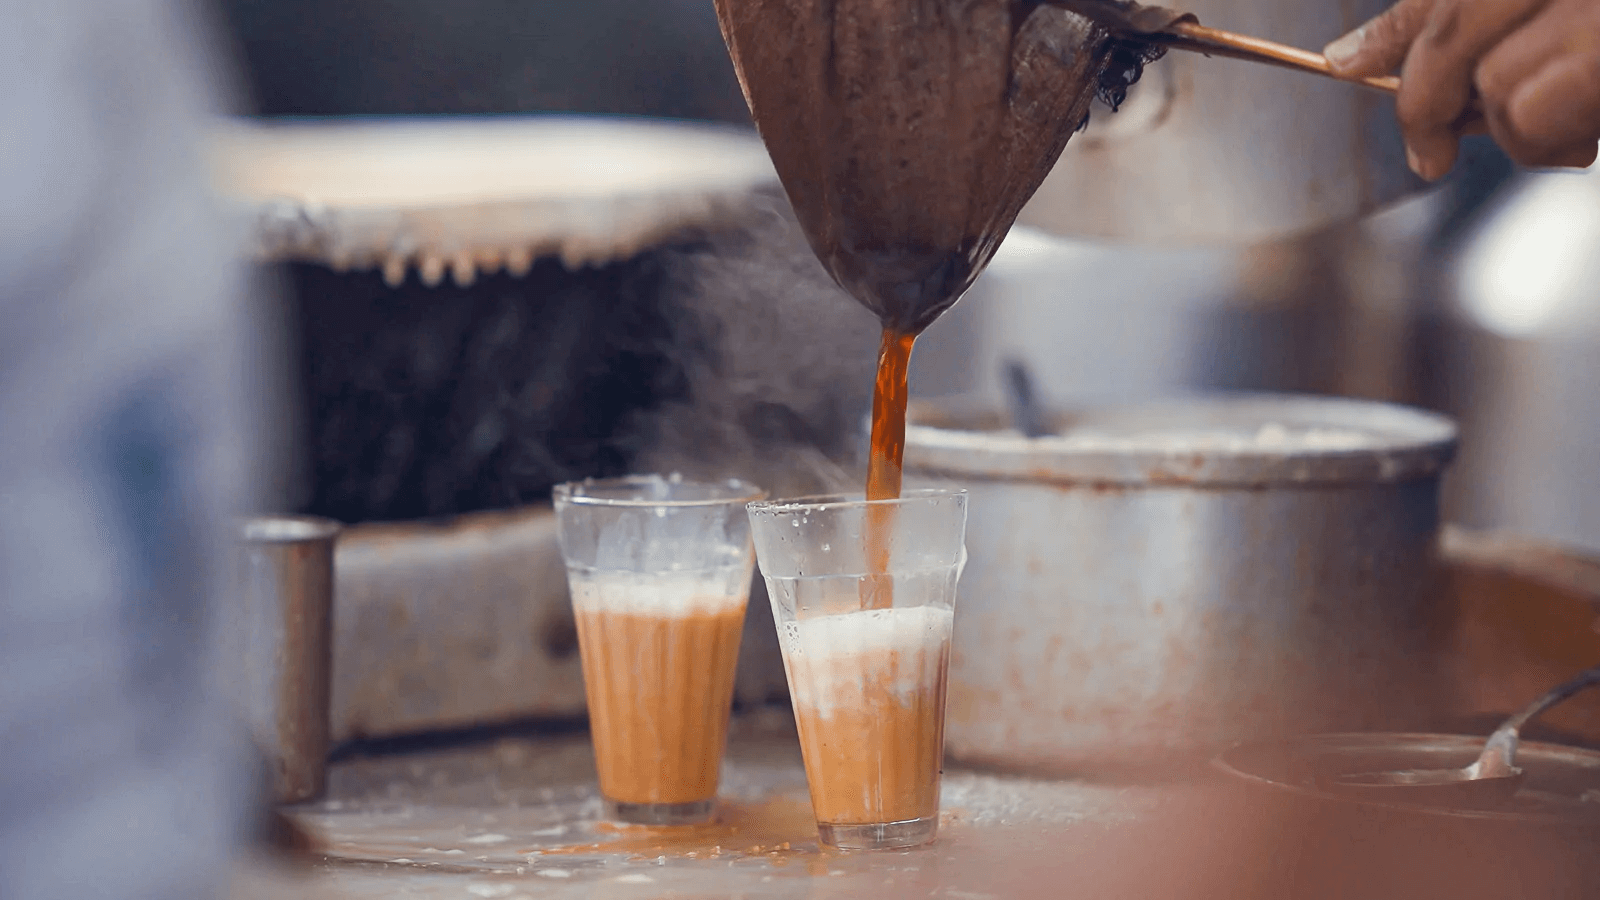 Load video: Authentic masala chai sourced from India.